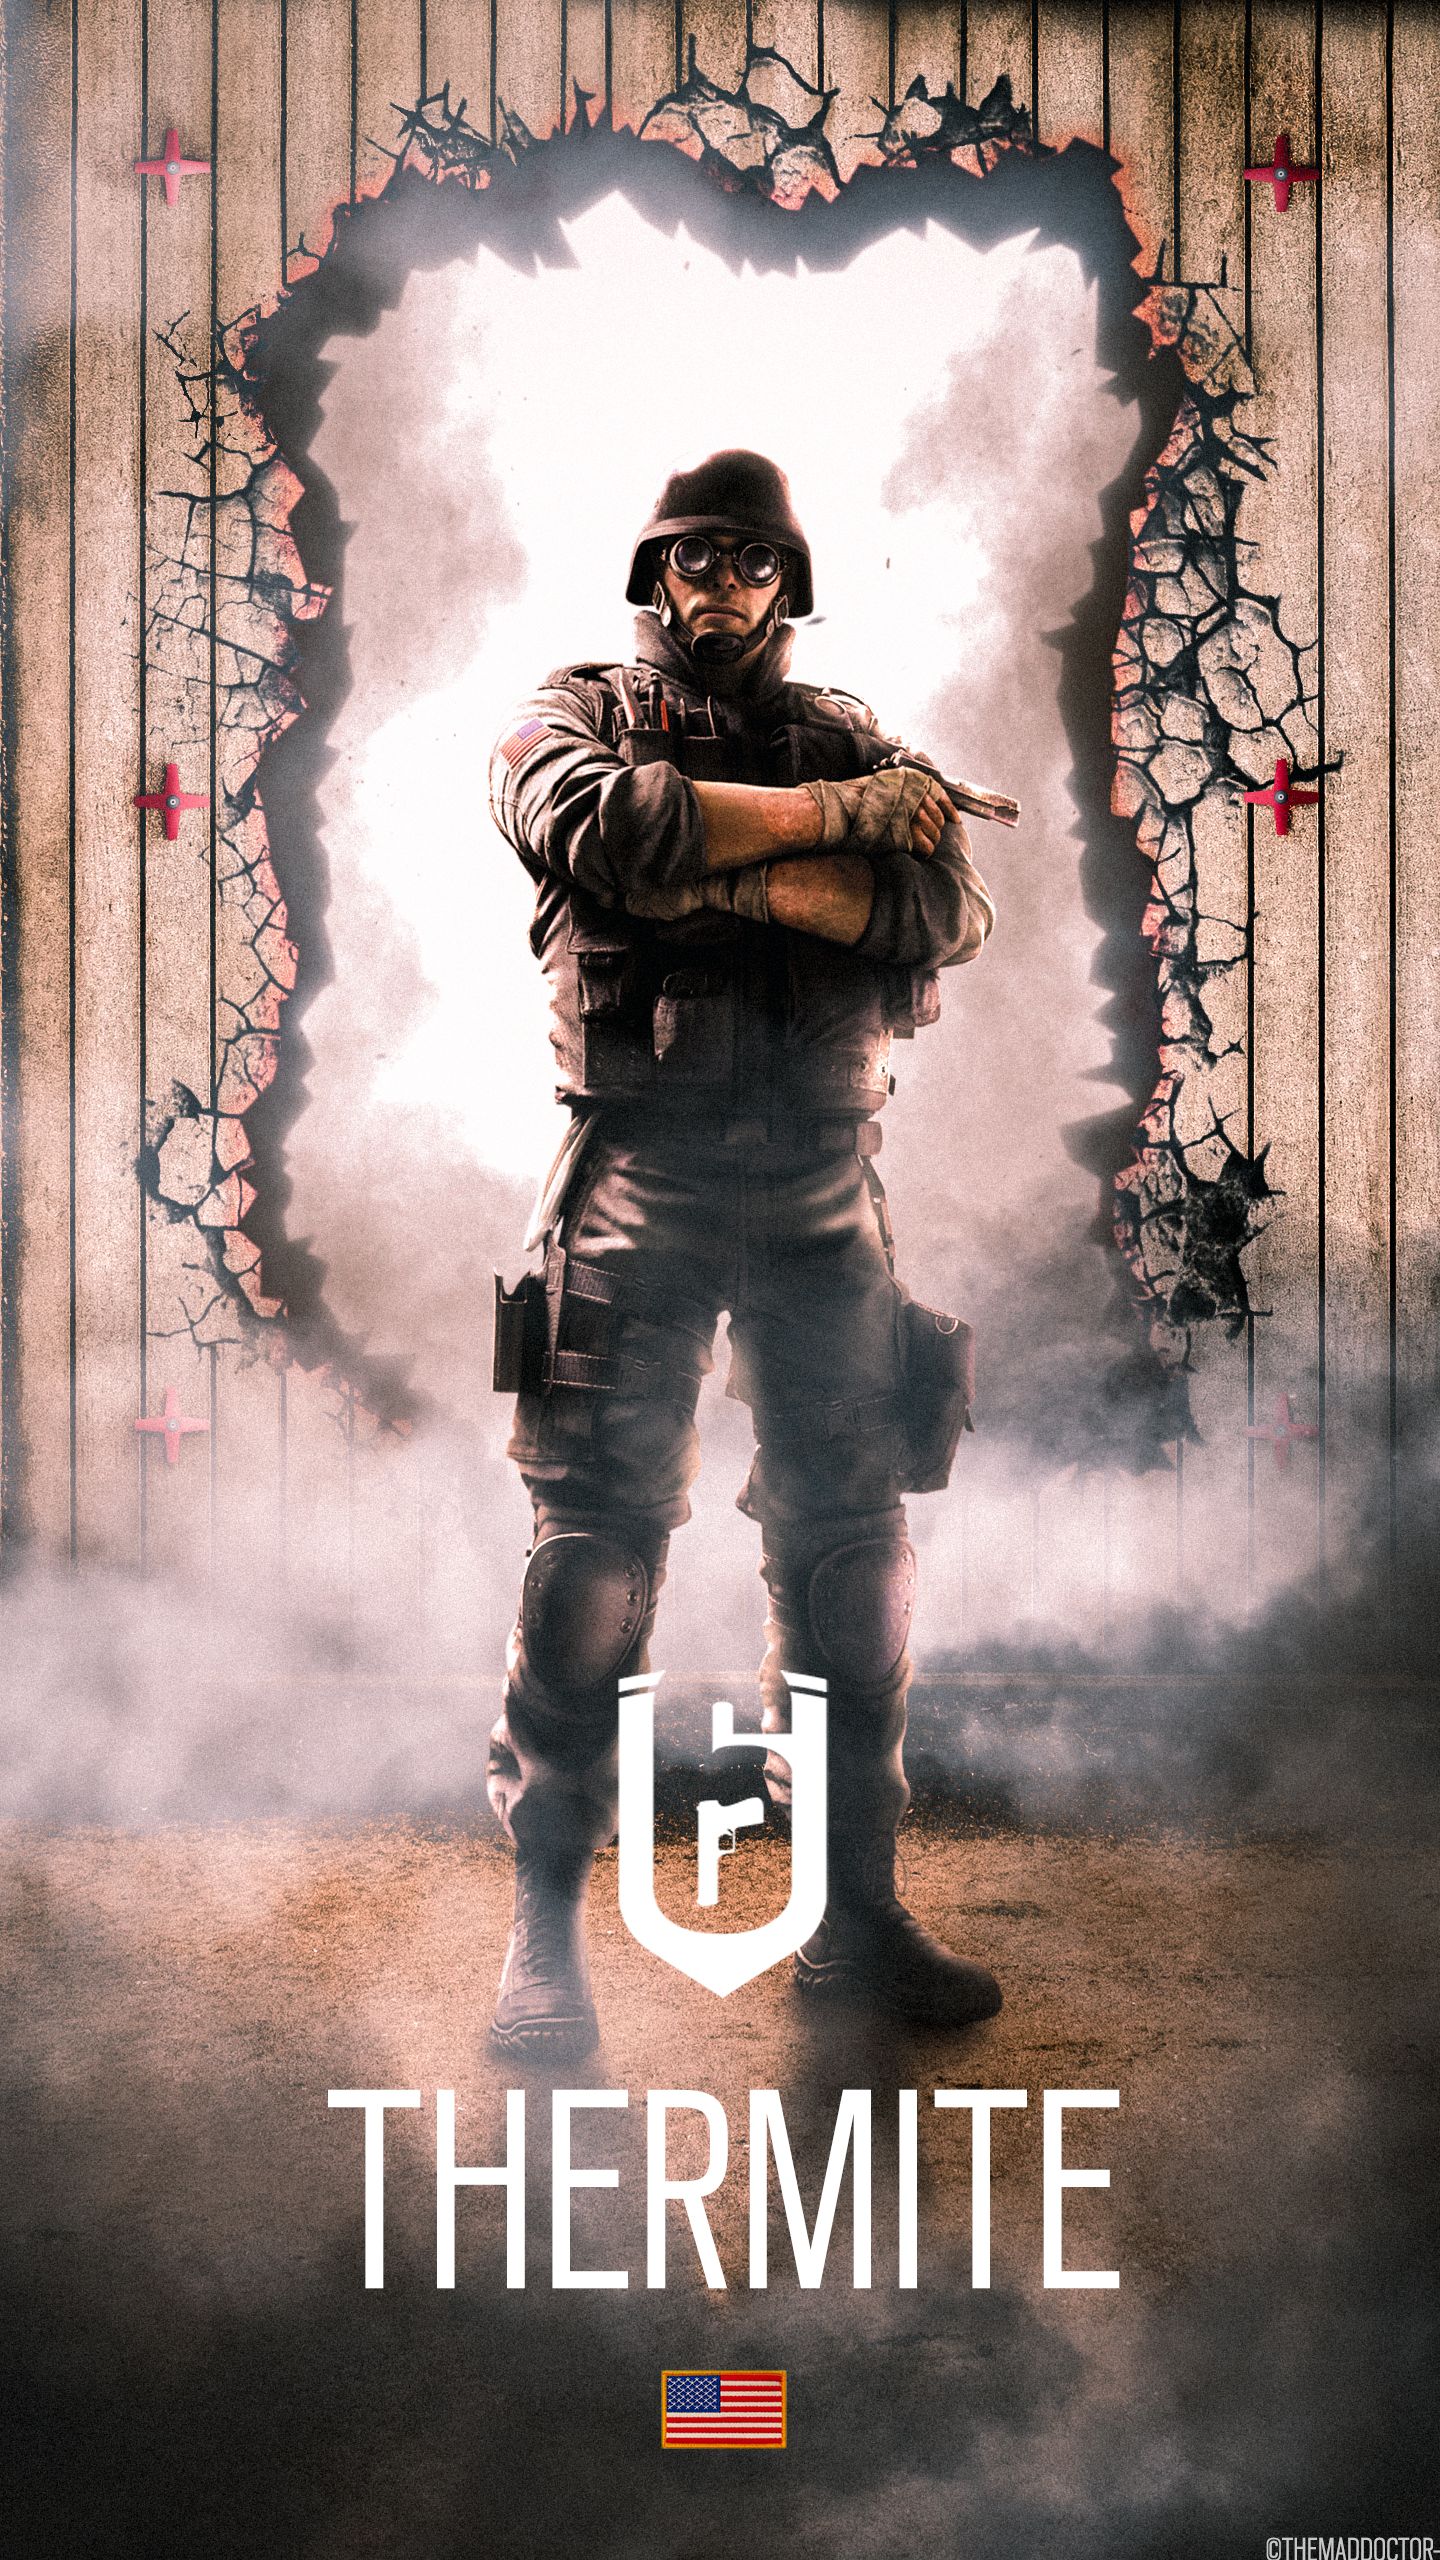 A Thermite's really big fuc**** wallpaper coming right up!